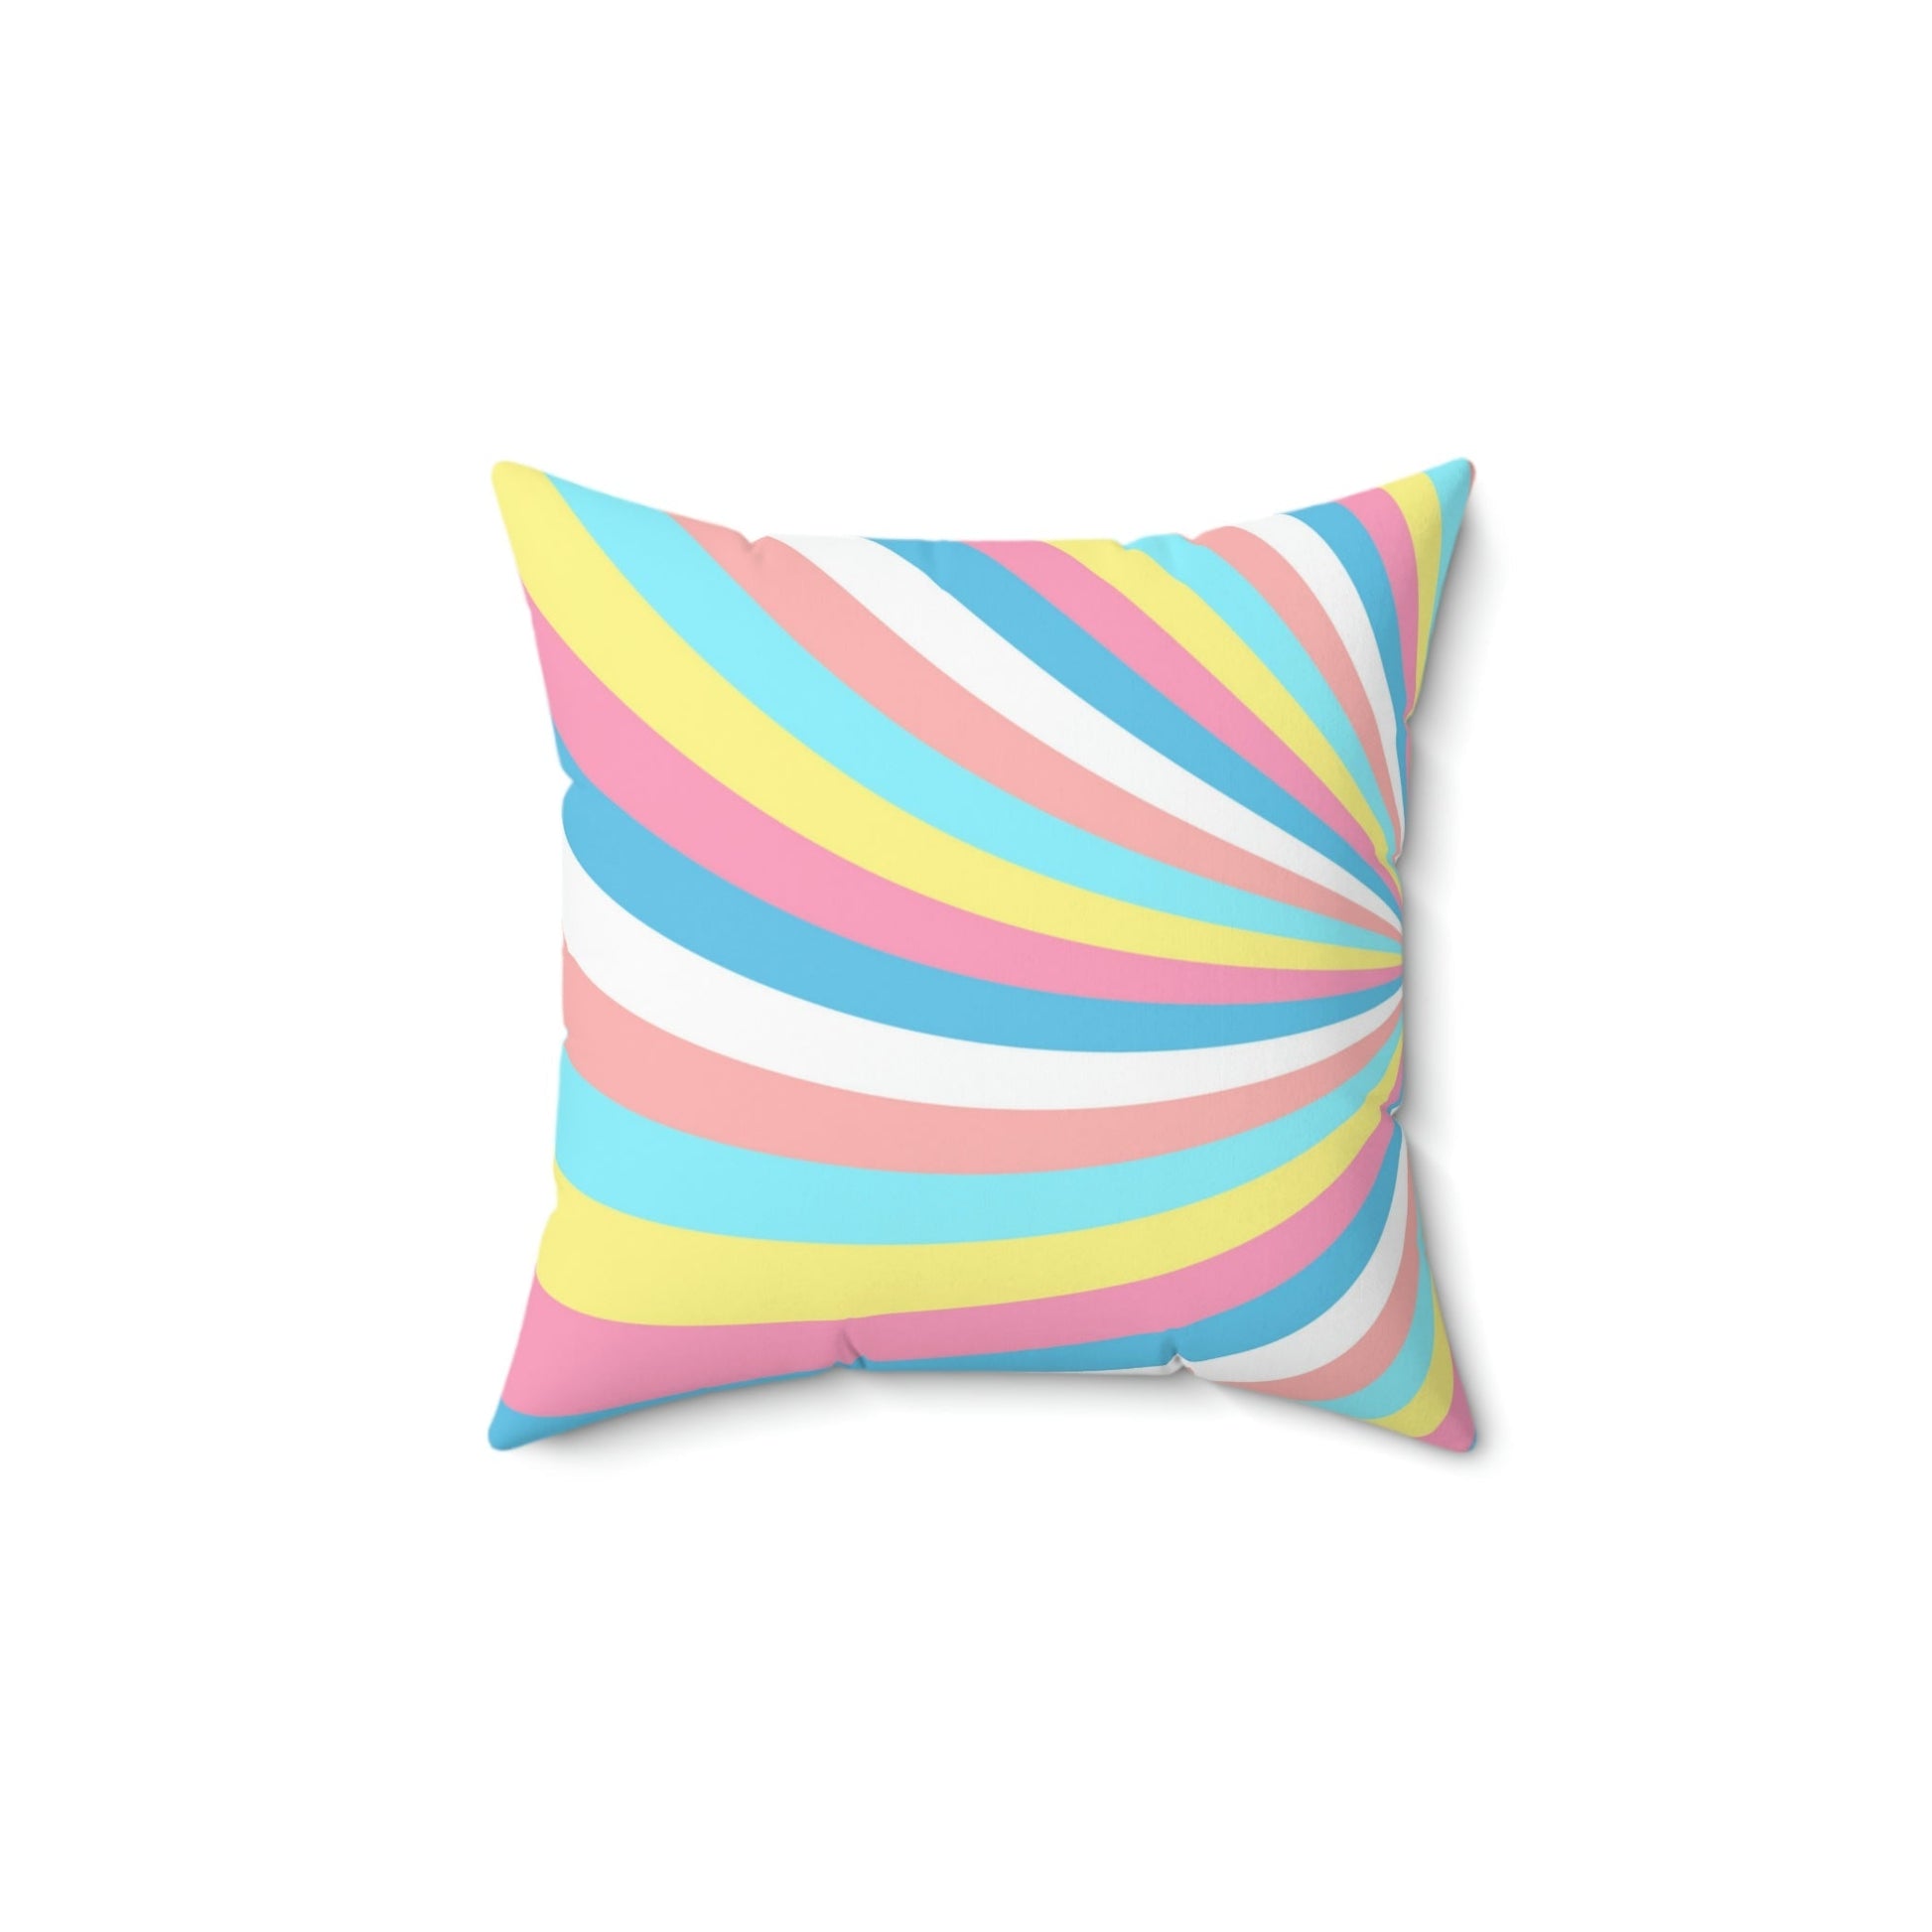 Cotton Candy Rainbow Swirl Square Pillow Home Decor Pink Sweetheart